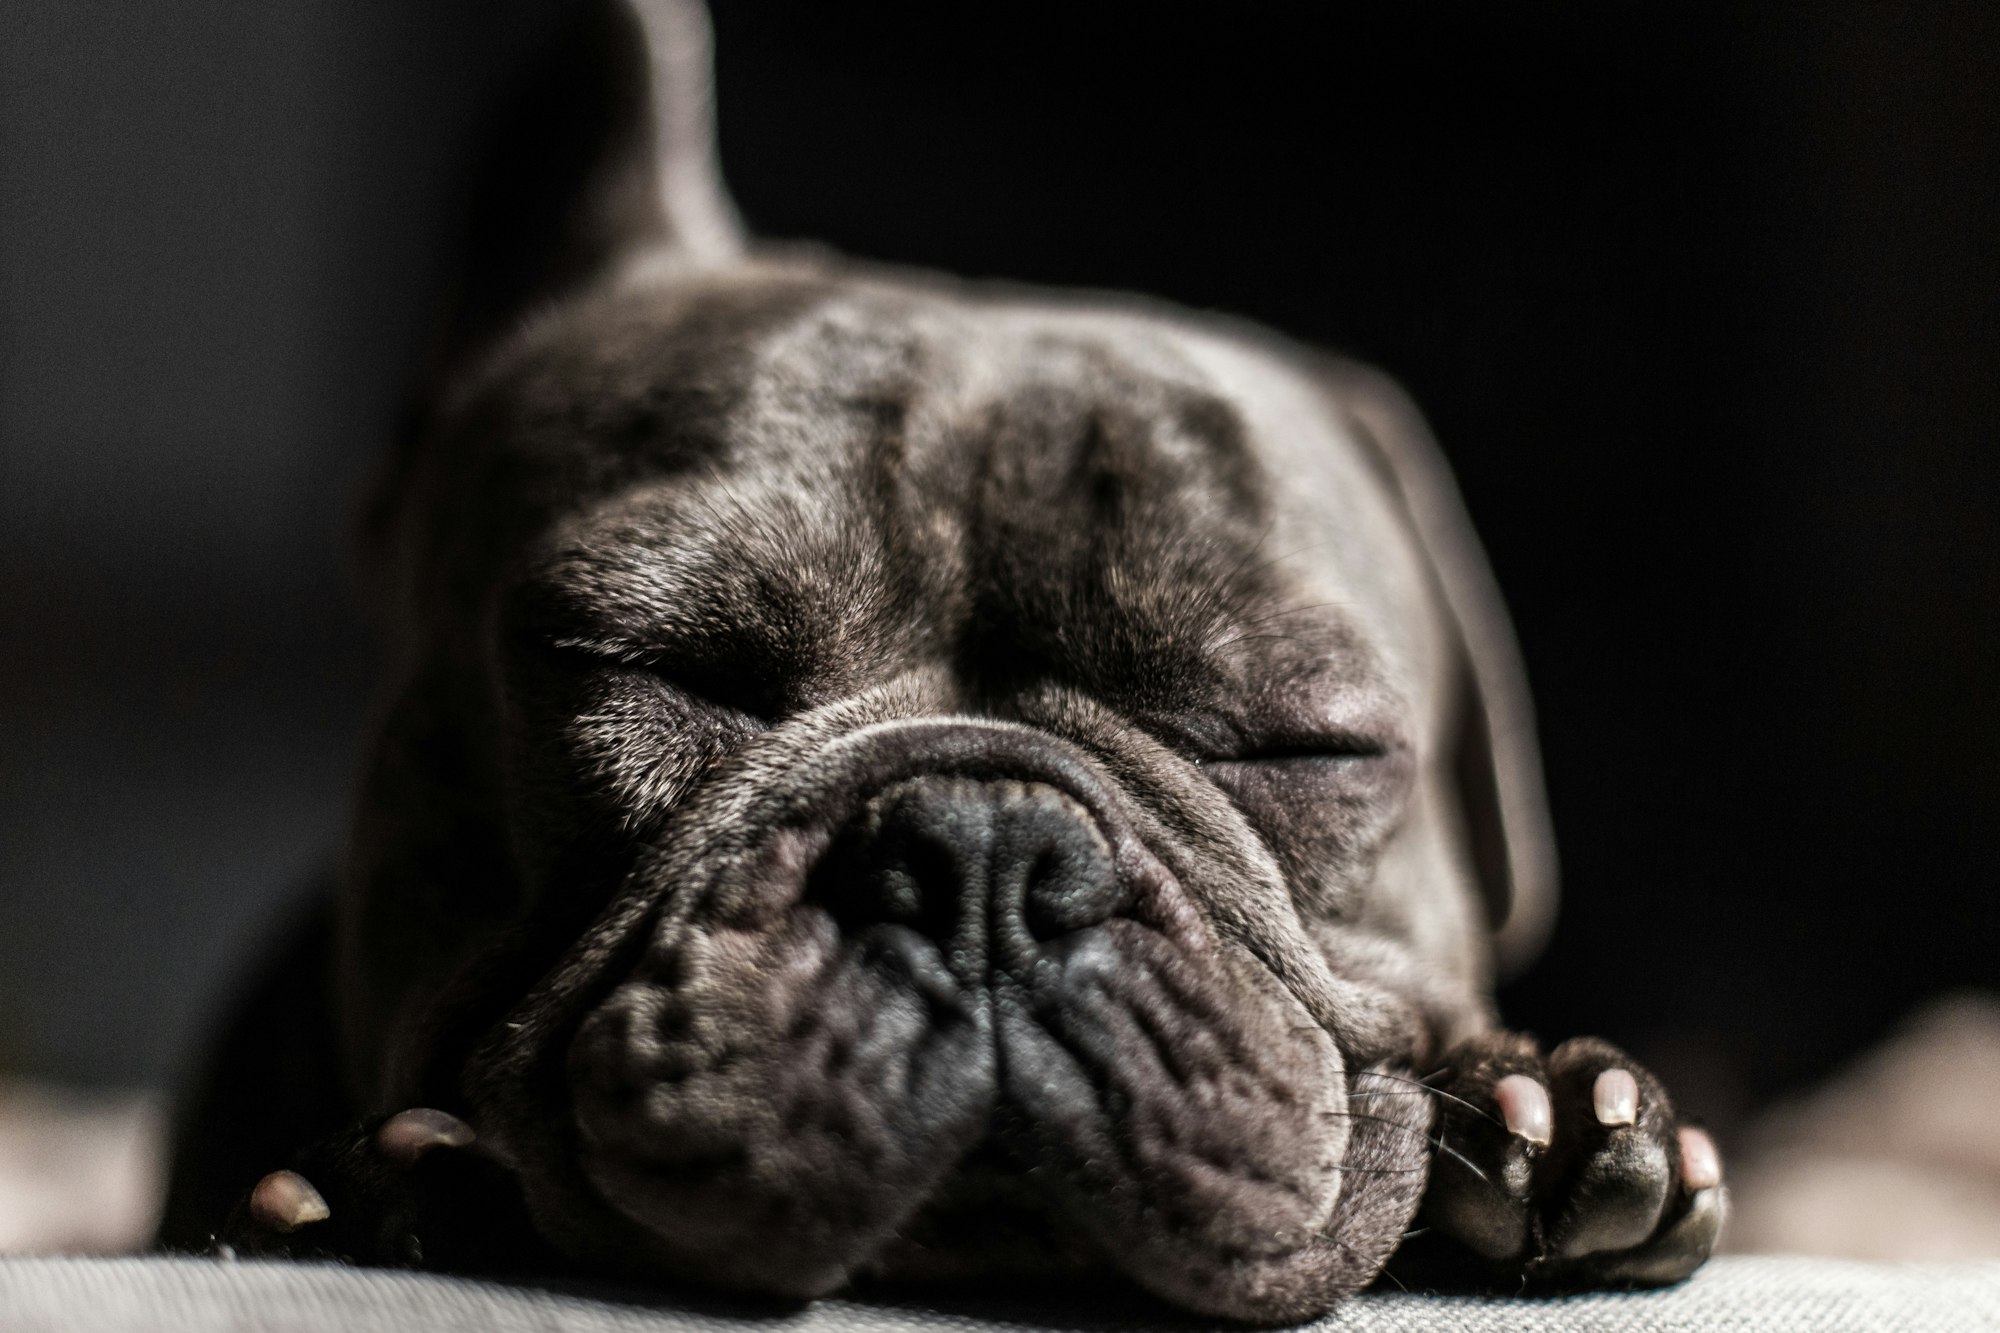 Why Does My Dog Snore? Everything You Need to Know